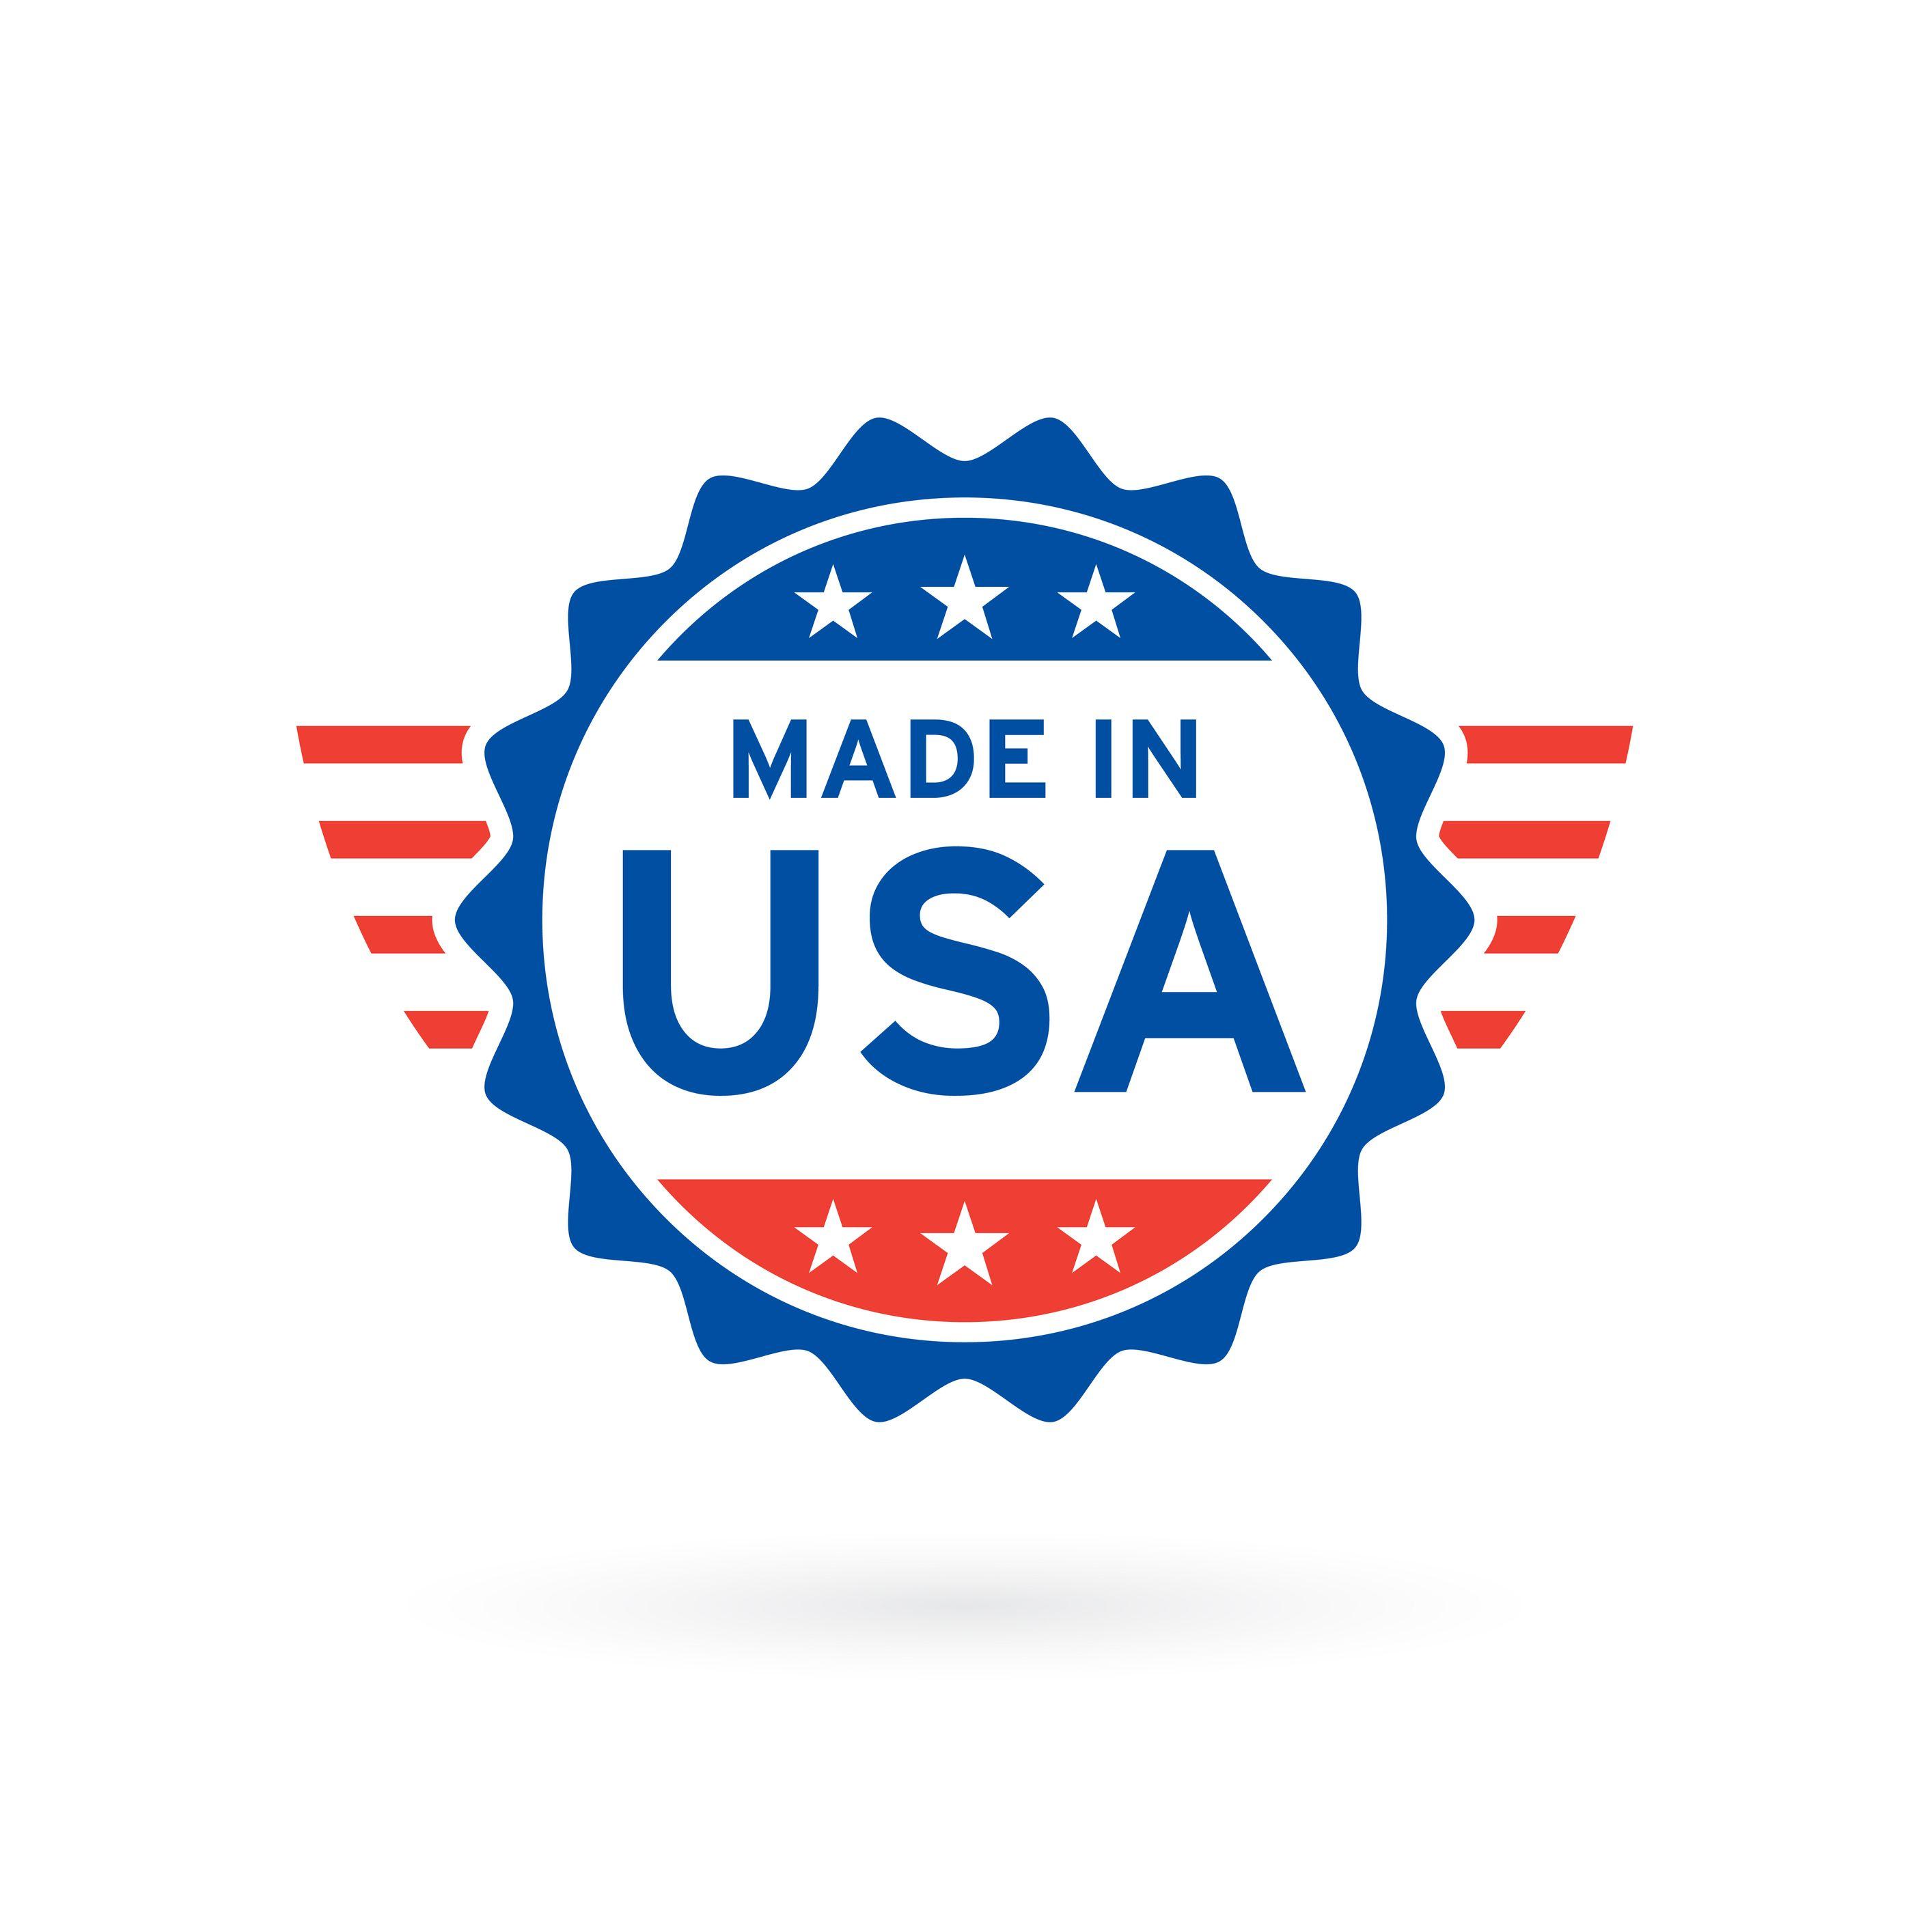 Made in USA Logo - Industrial Flash Storage Built to Order in the United States. Delkin